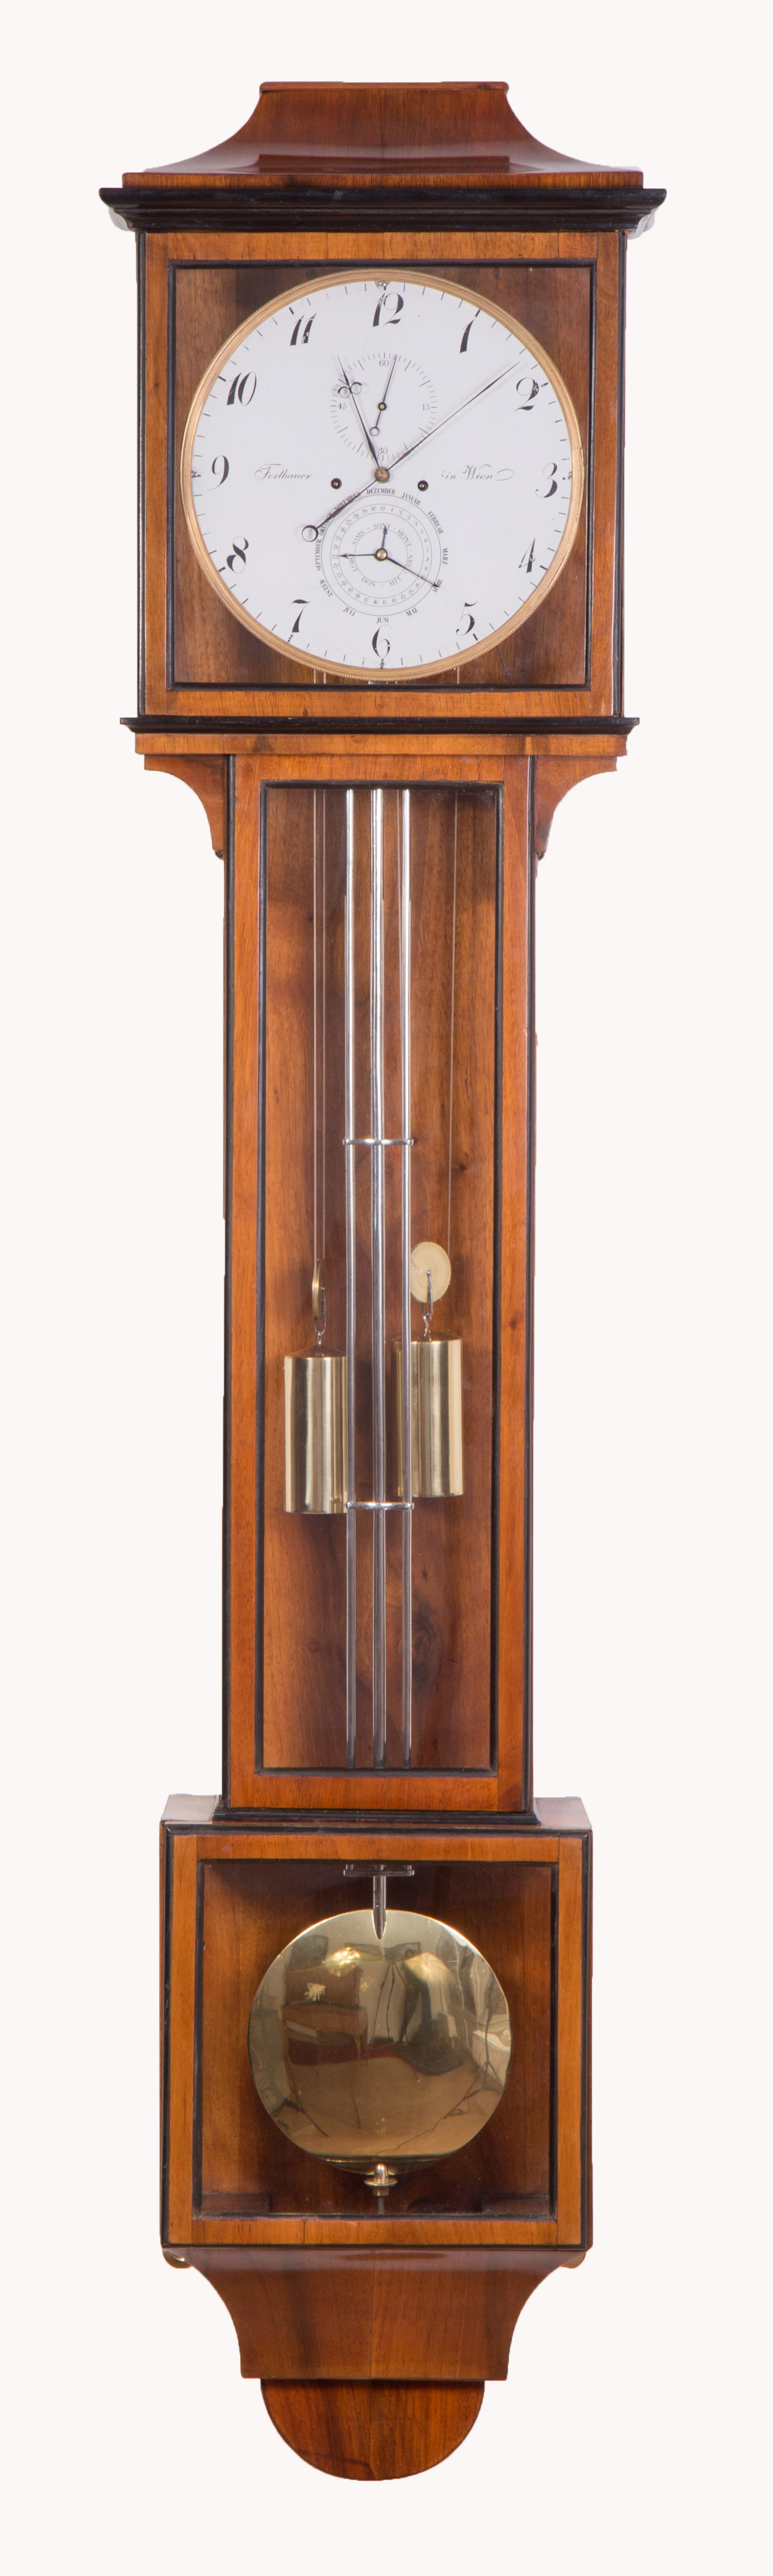 Laterndl clock by Philipp Fertbauer with 8 days duration, c. 1810. 